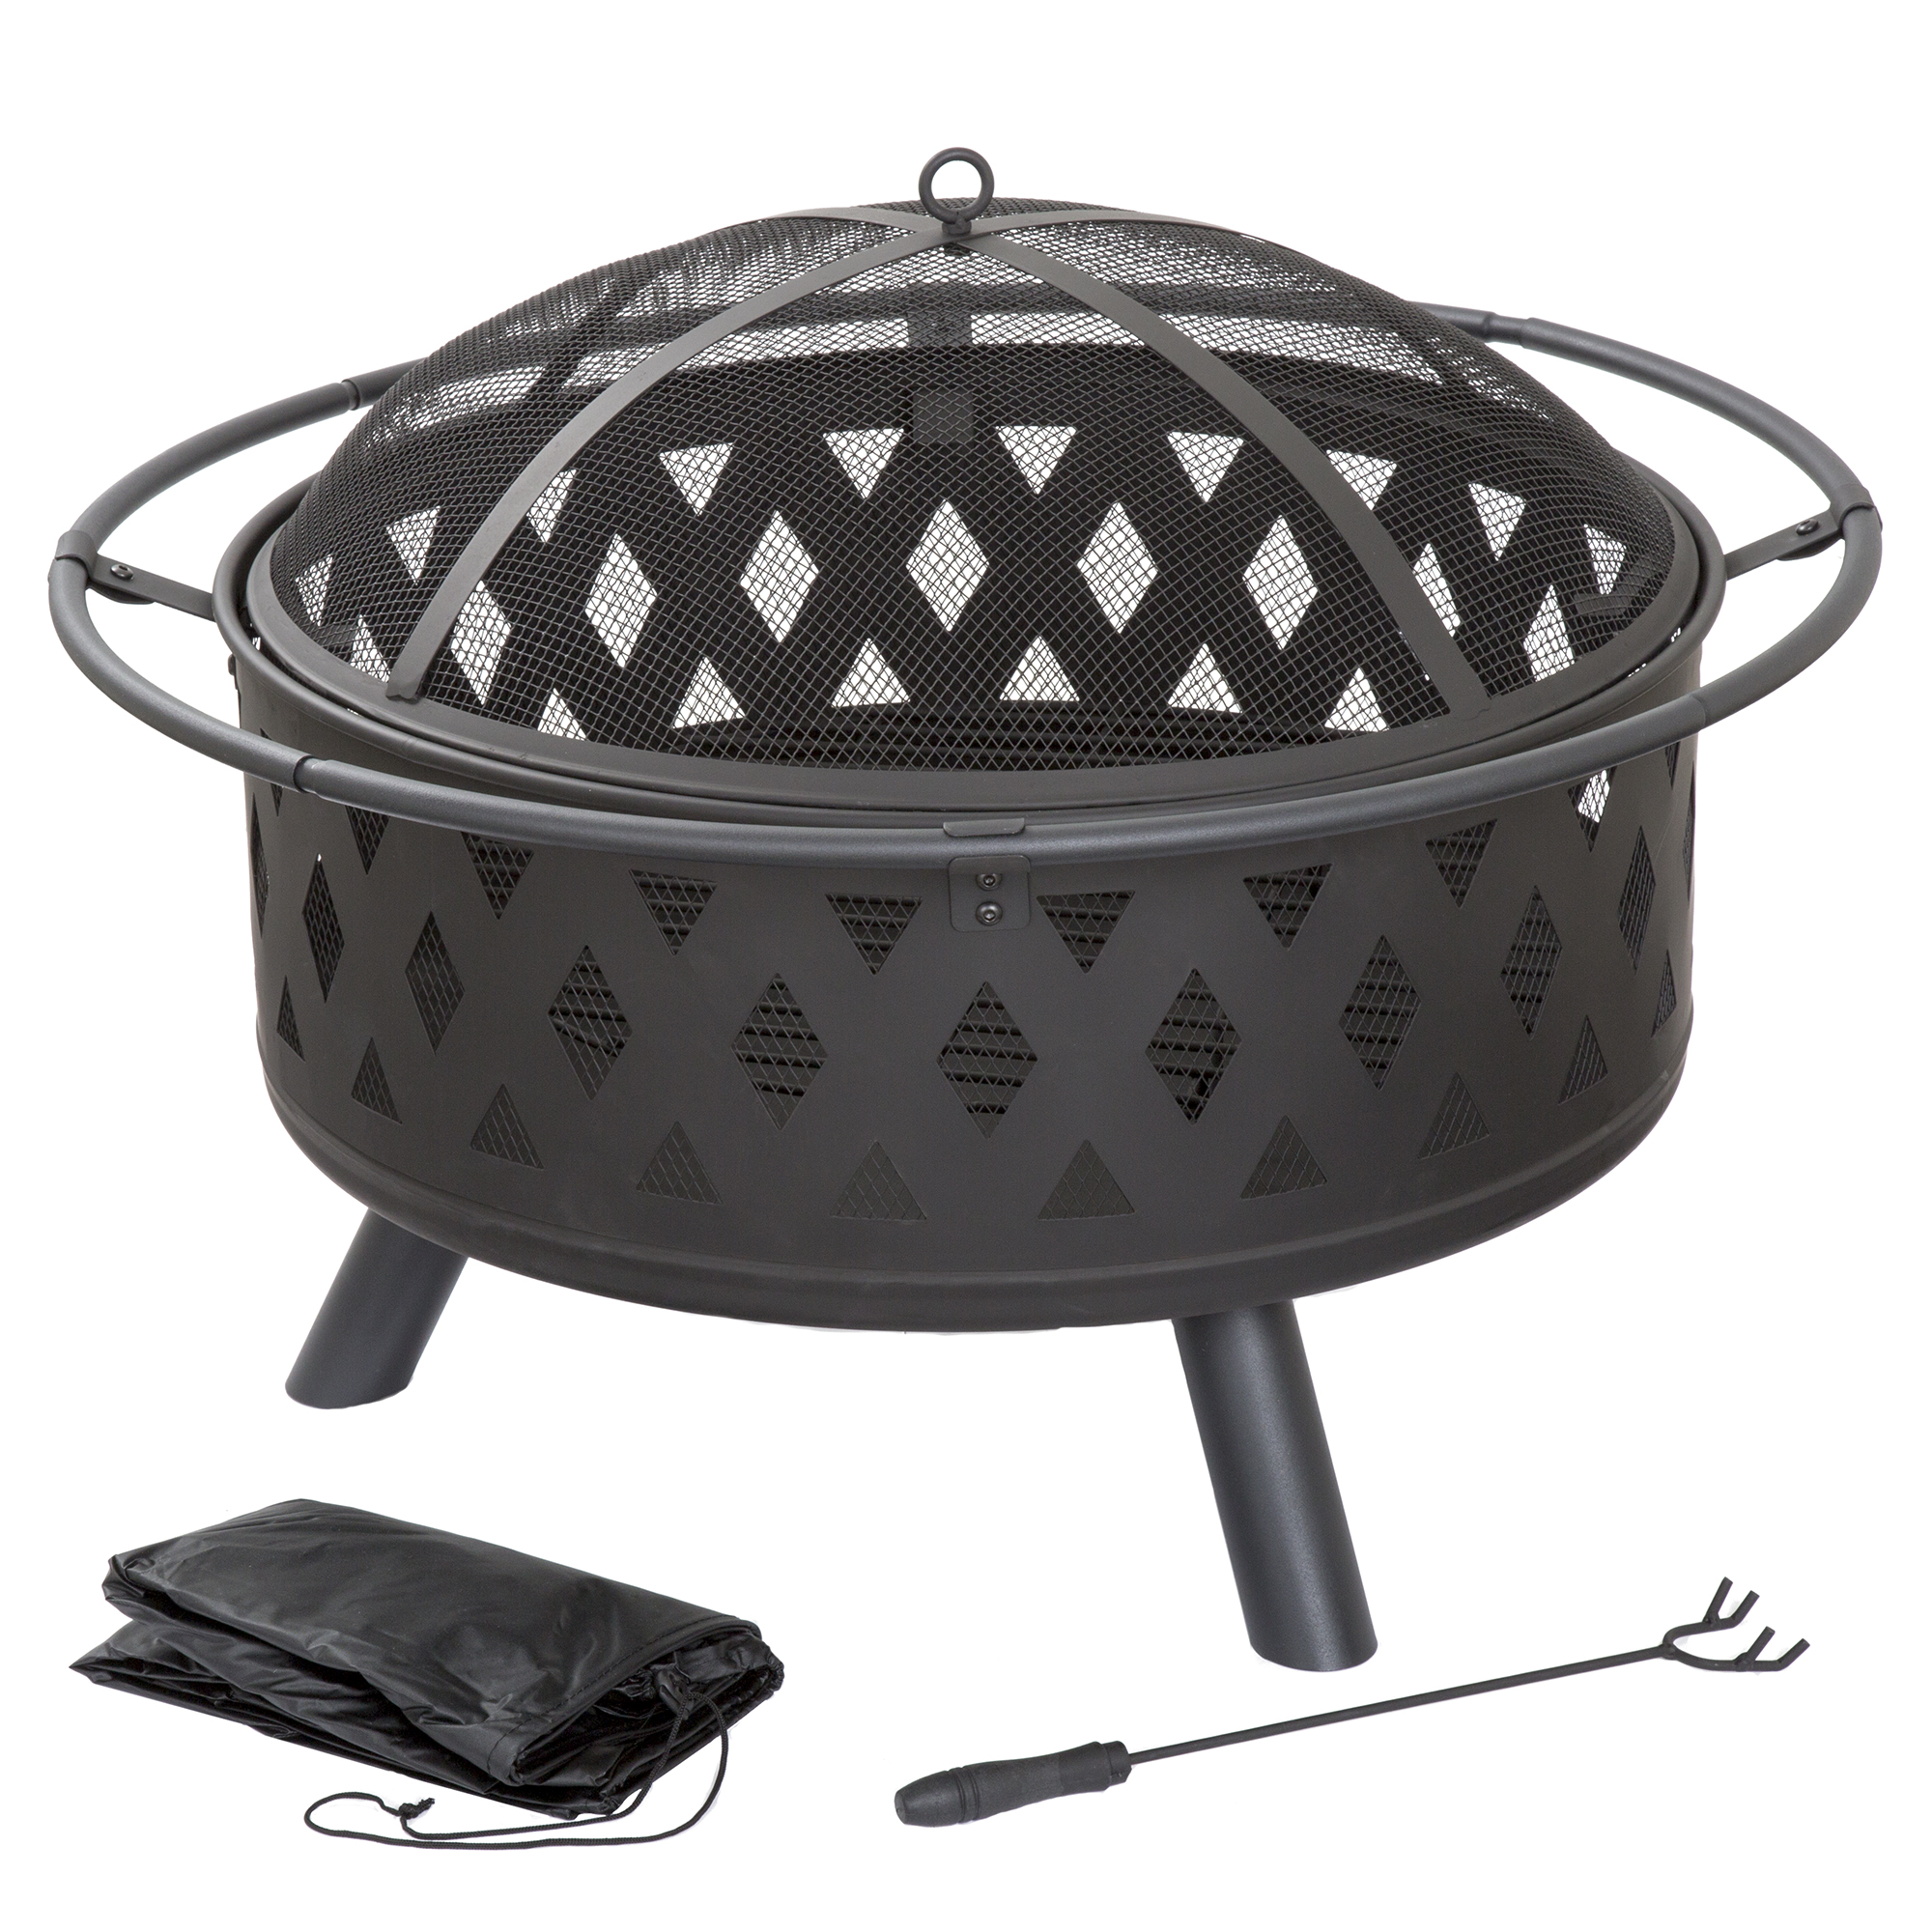 Pure Garden 32-Inch Outdoor Wood Burning Fire Pit with PVC Cover (Black) - image 2 of 10